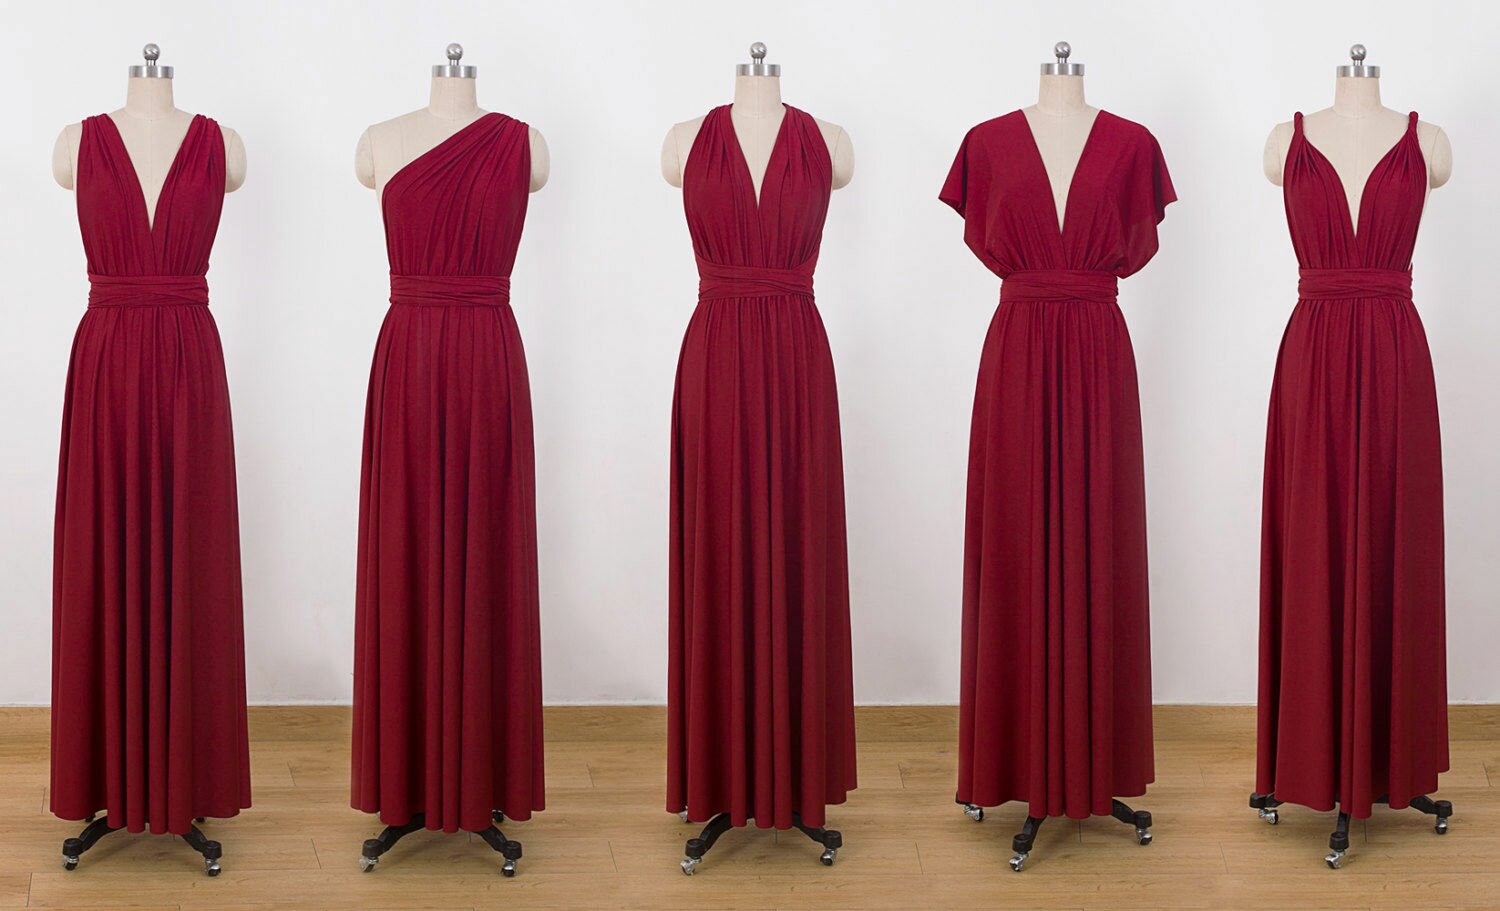 Infinity dress red infinity dress, bridesmaid red dresses